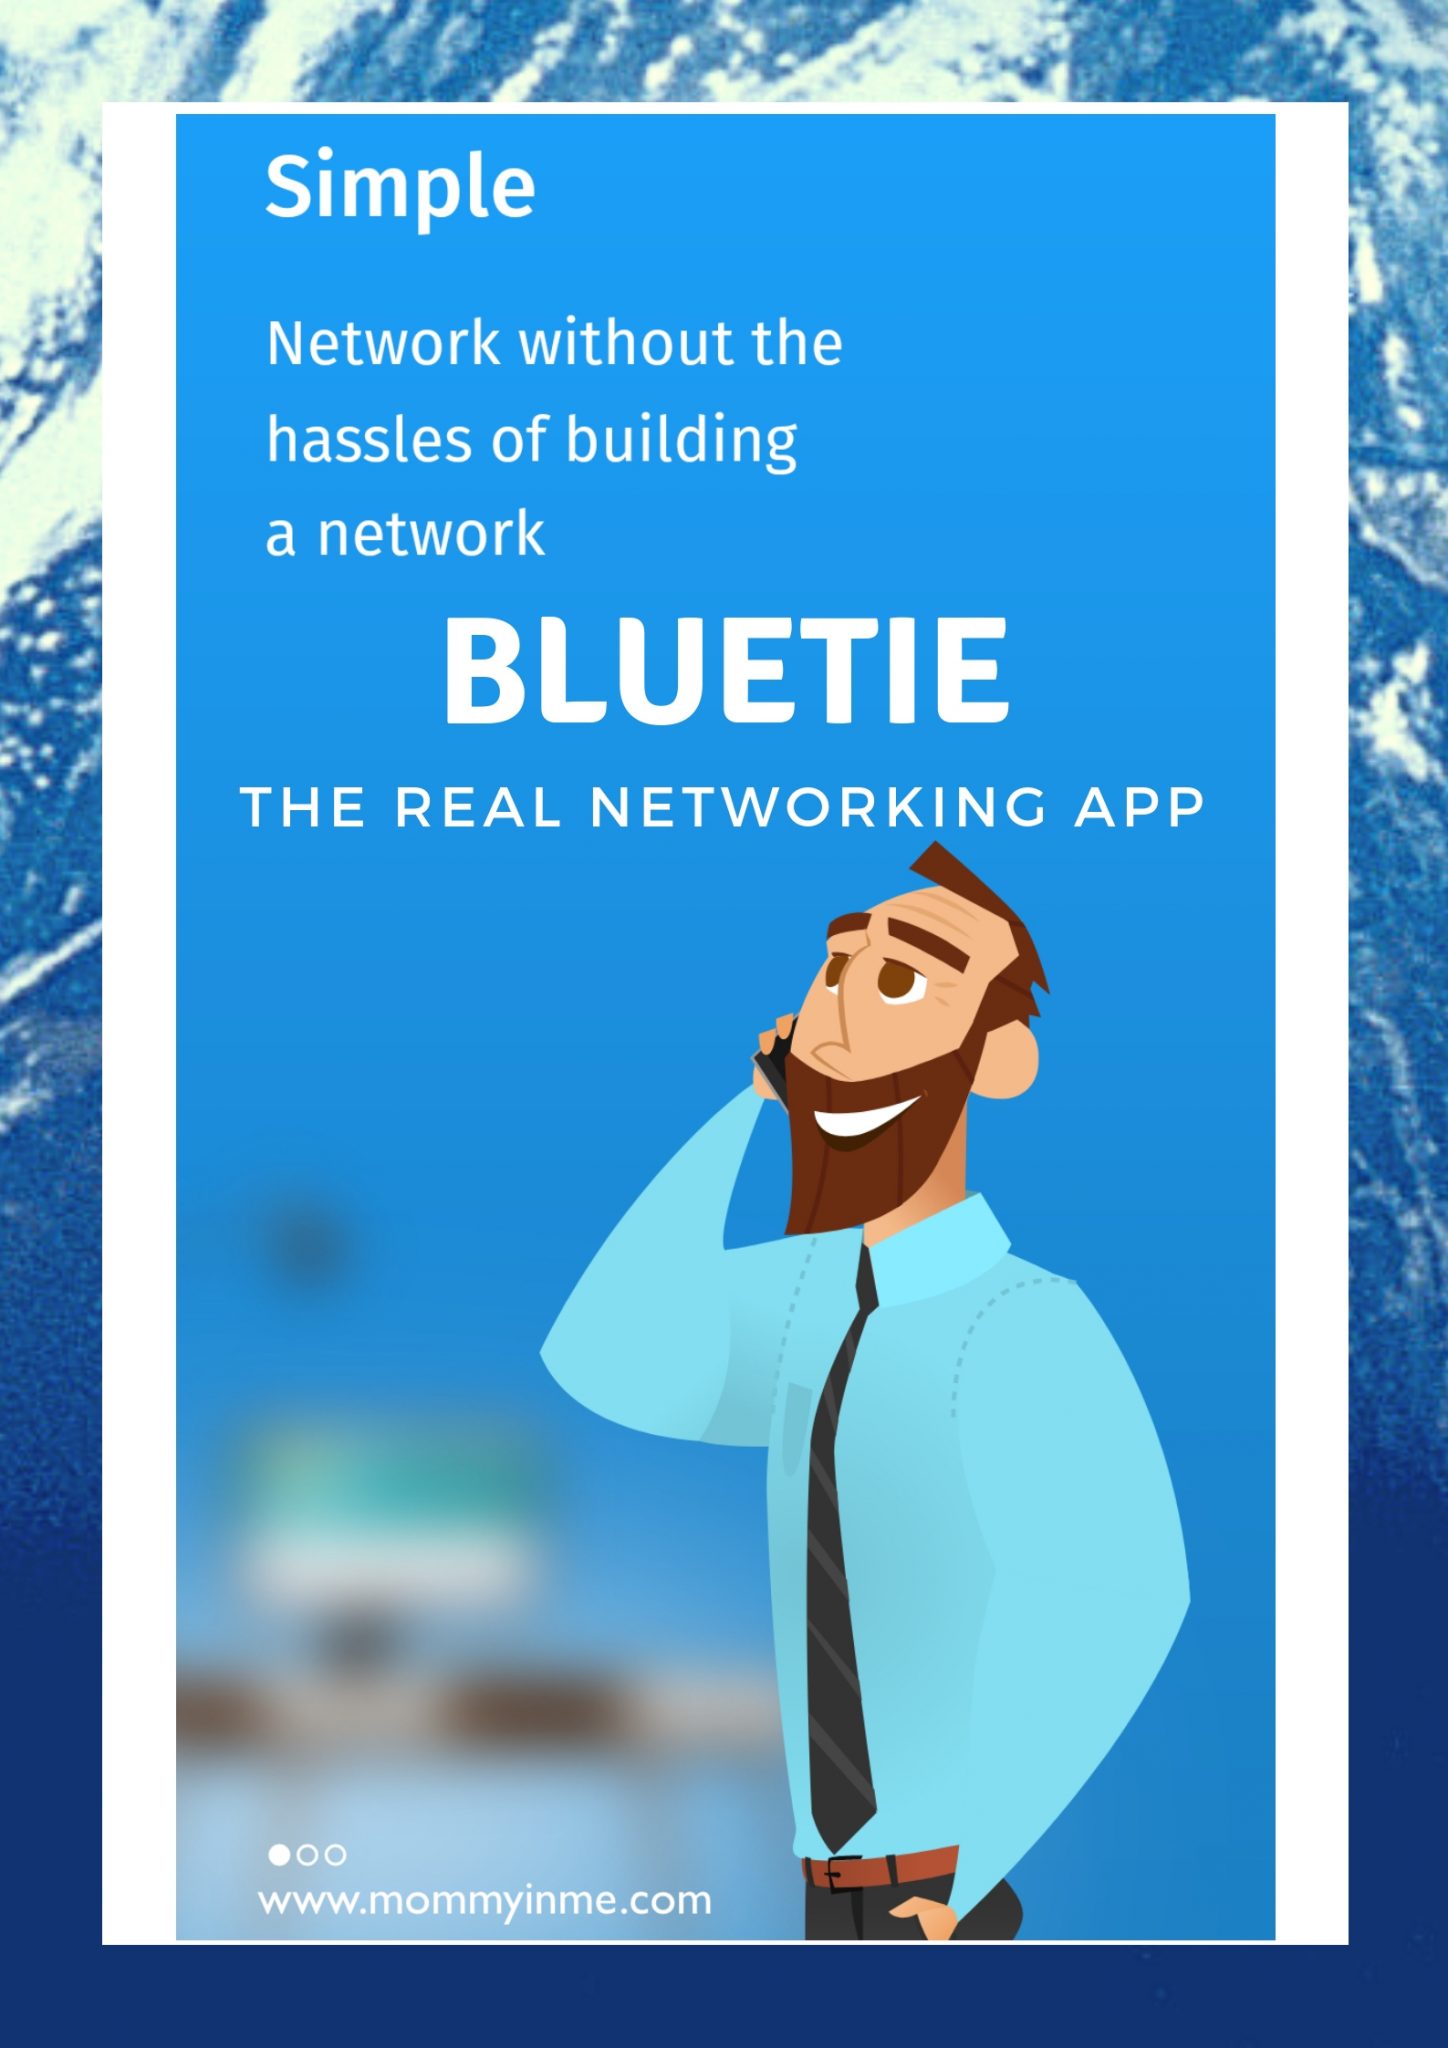 Are you a professional looking for some serious networking, be it related to mentorship or seeking funds or more? Then read the post & download BlueTie app. #bluetie #professionalnetworking #businessnetworking #networking #networkingapp #KumalGarud #funding #investor #mentorship #Linkedin